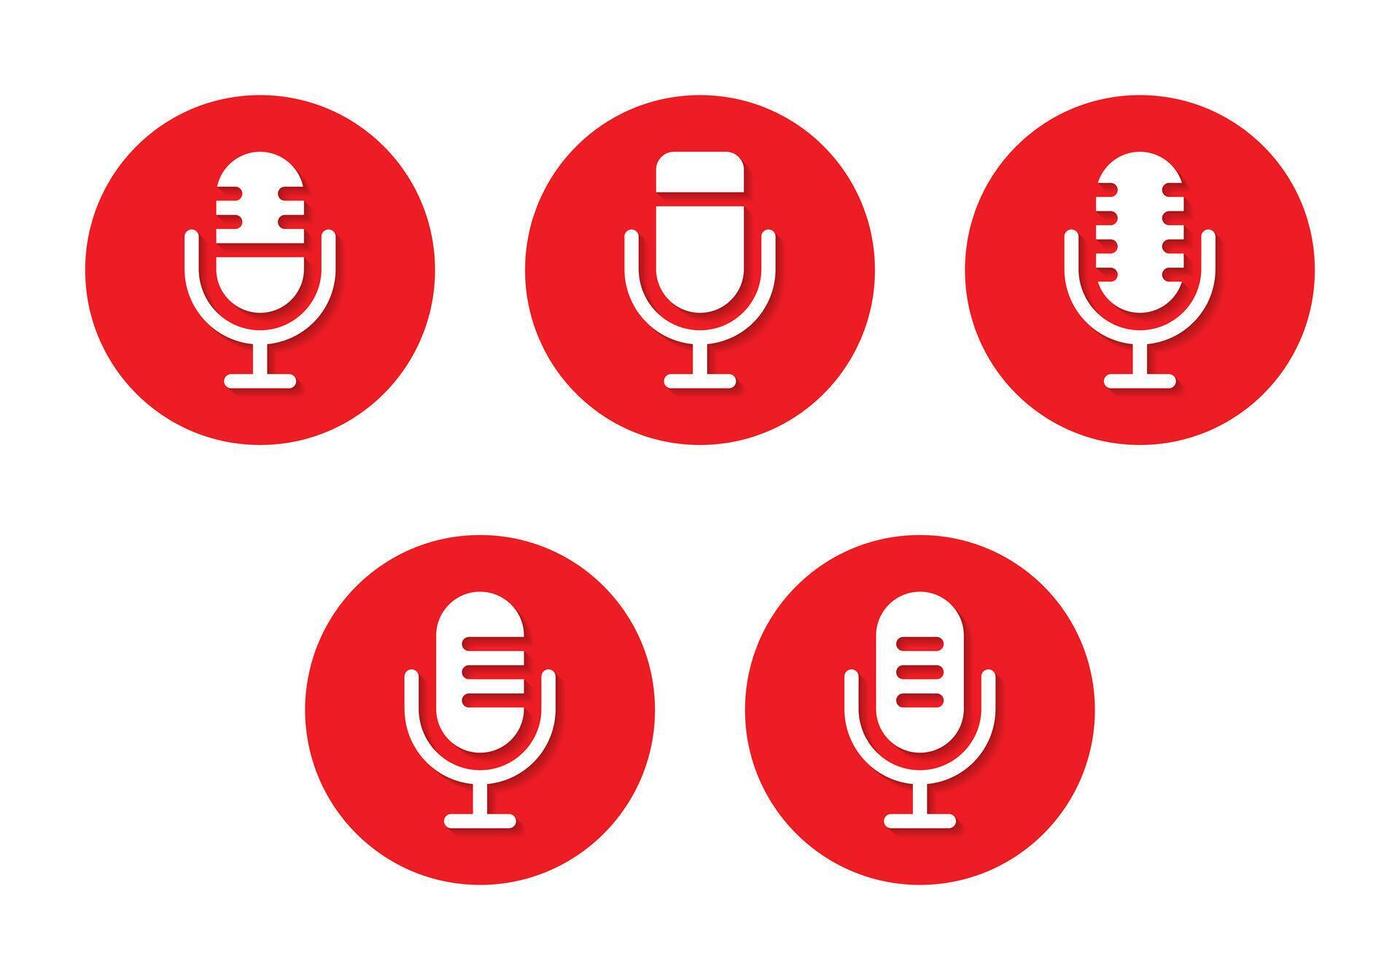 Retro microphone icon with shadow. Mic sign symbol on red circle vector